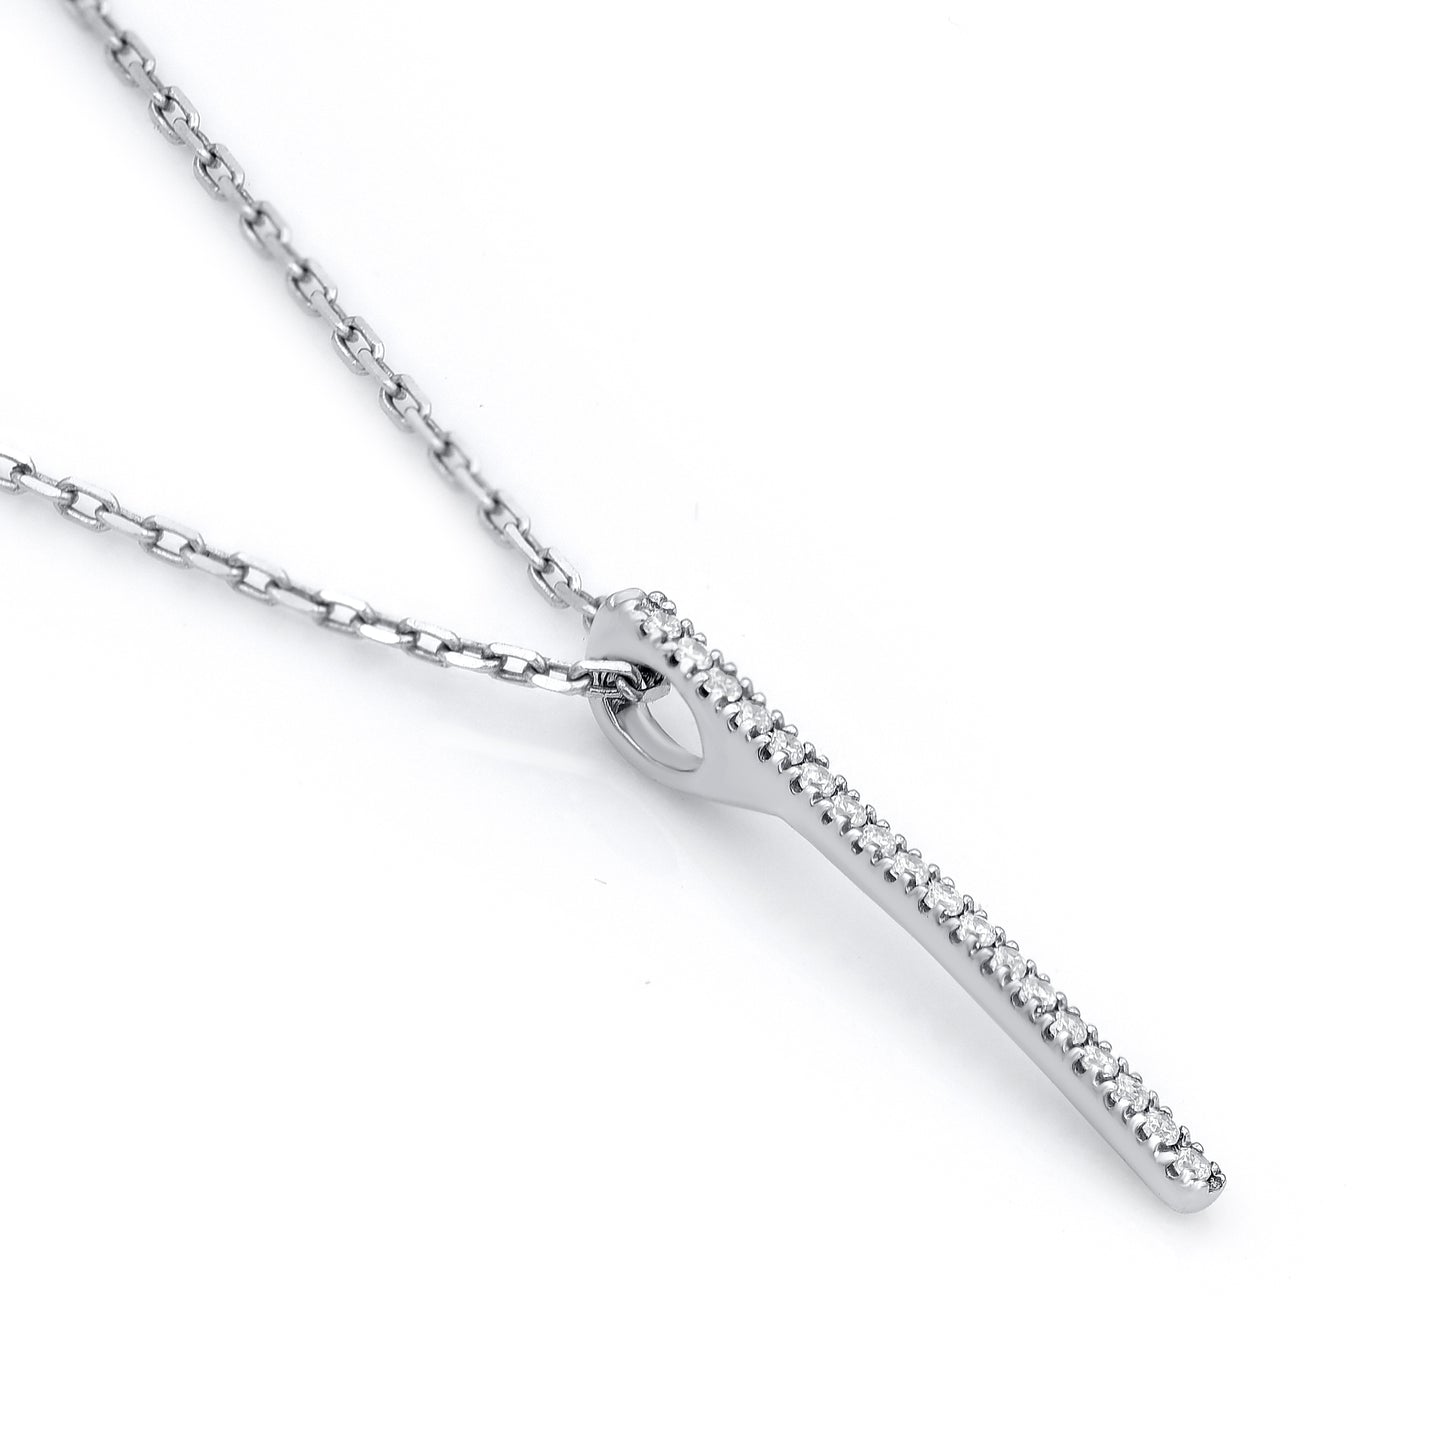 Vertical Bar Pendant Necklace in 925 Sterling Silver